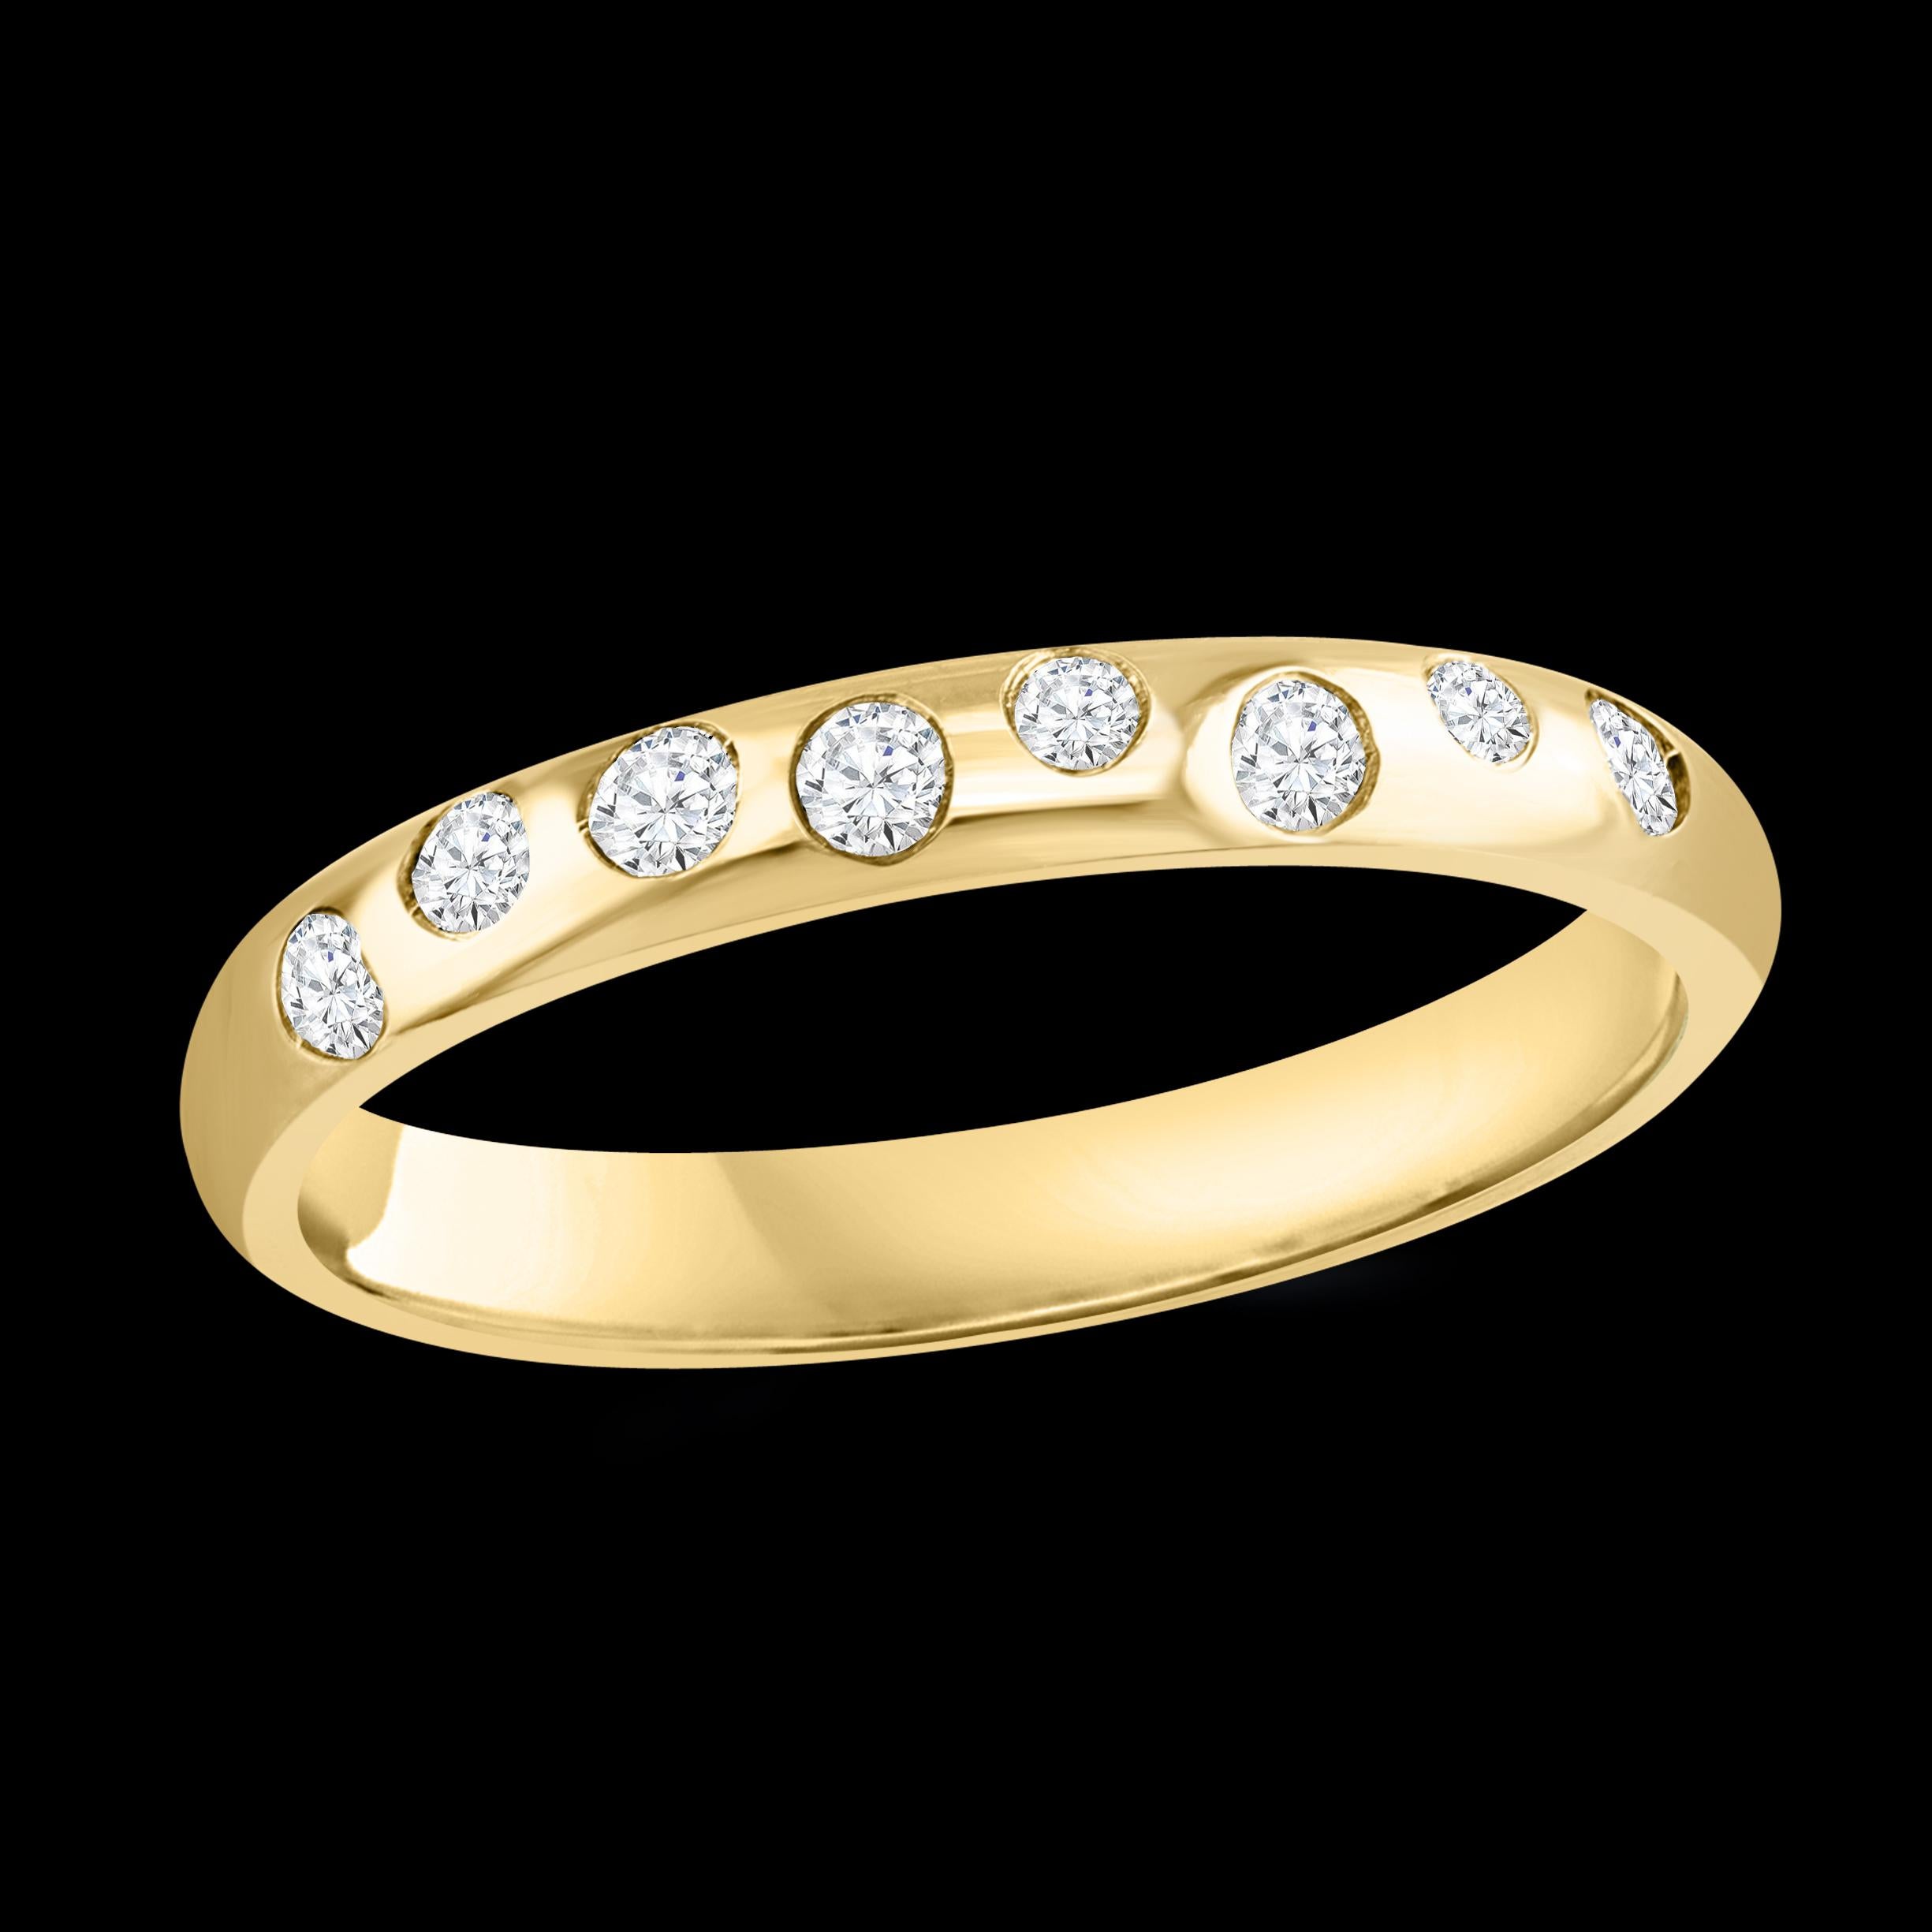 8 Flush Set Bezel Diamond Eternity Wedding Band in 14 Karat Yellow Gold Size 10.25
All 8 diamonds are scattered only in a small portion in the front of the band .
Very clean and shiny diamonds.
This eternity band features Gypsy set or burnished, the